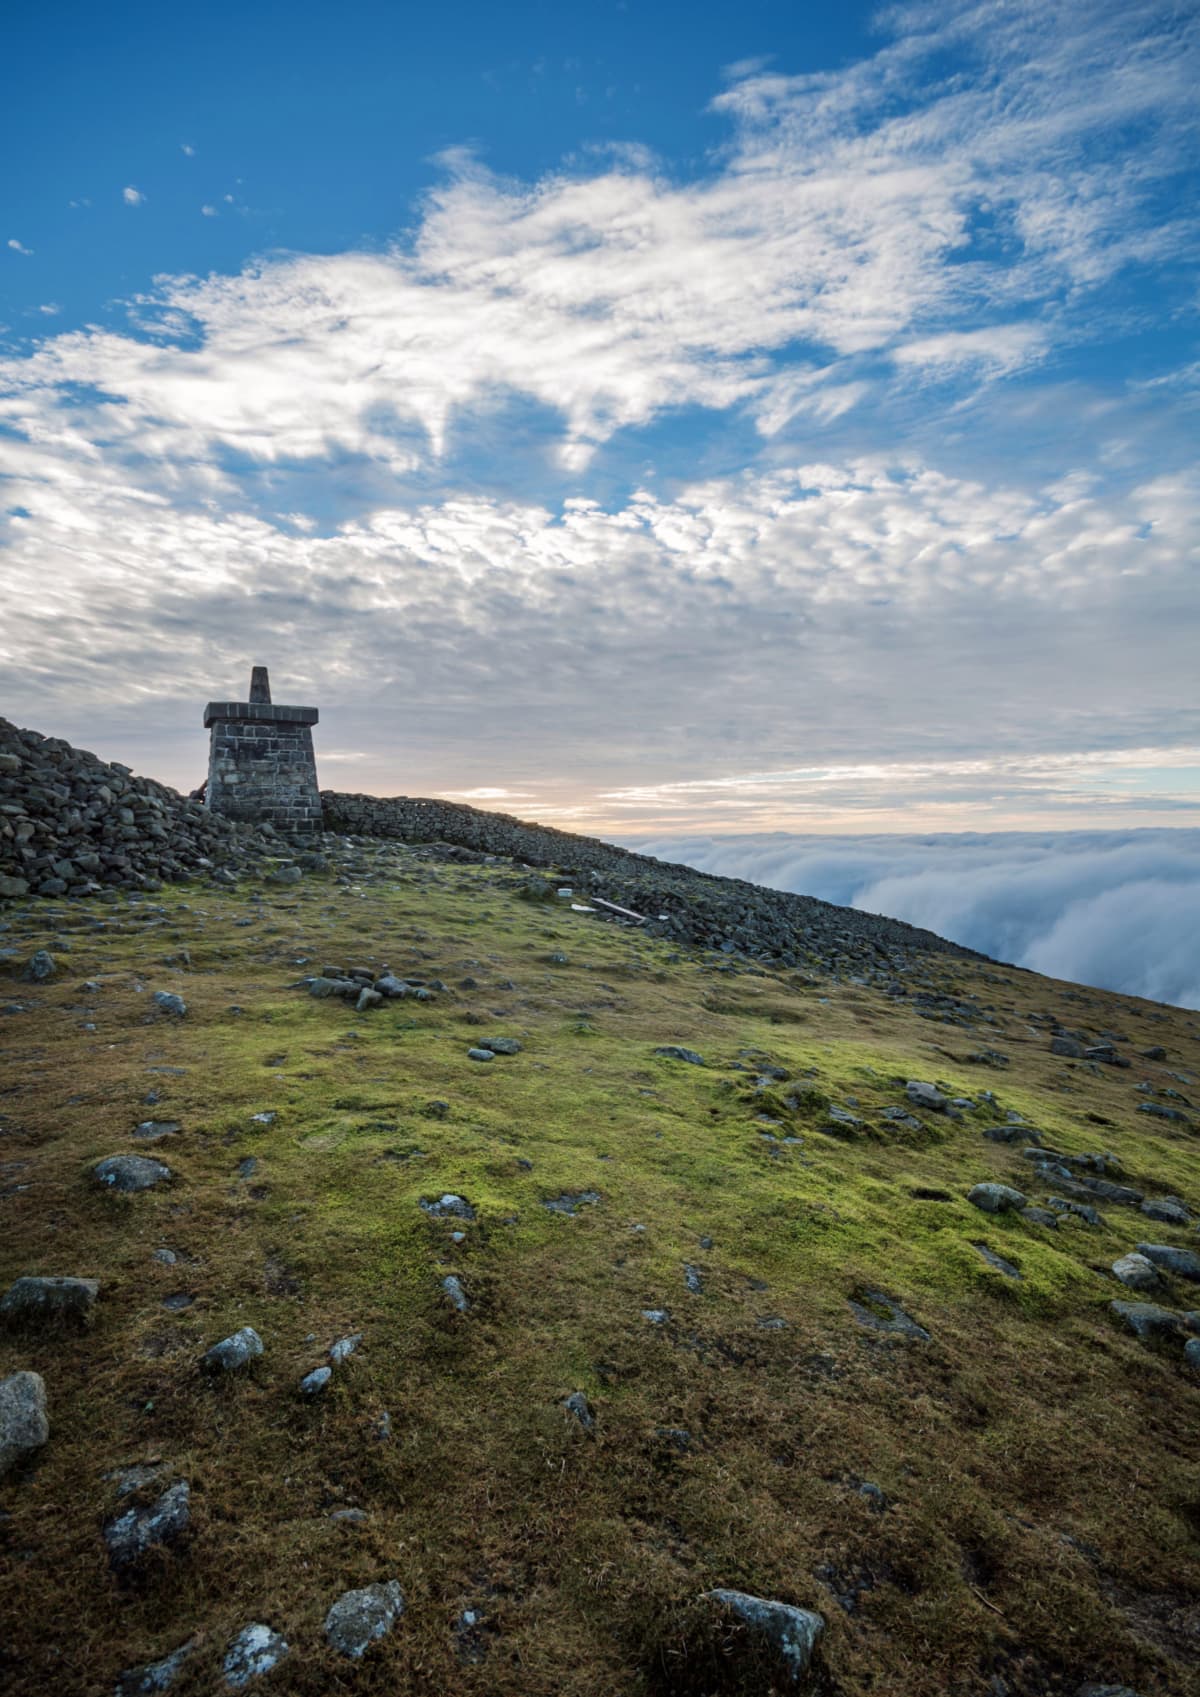 A view of the tower on top of Slieve Donard in Northern Ireland